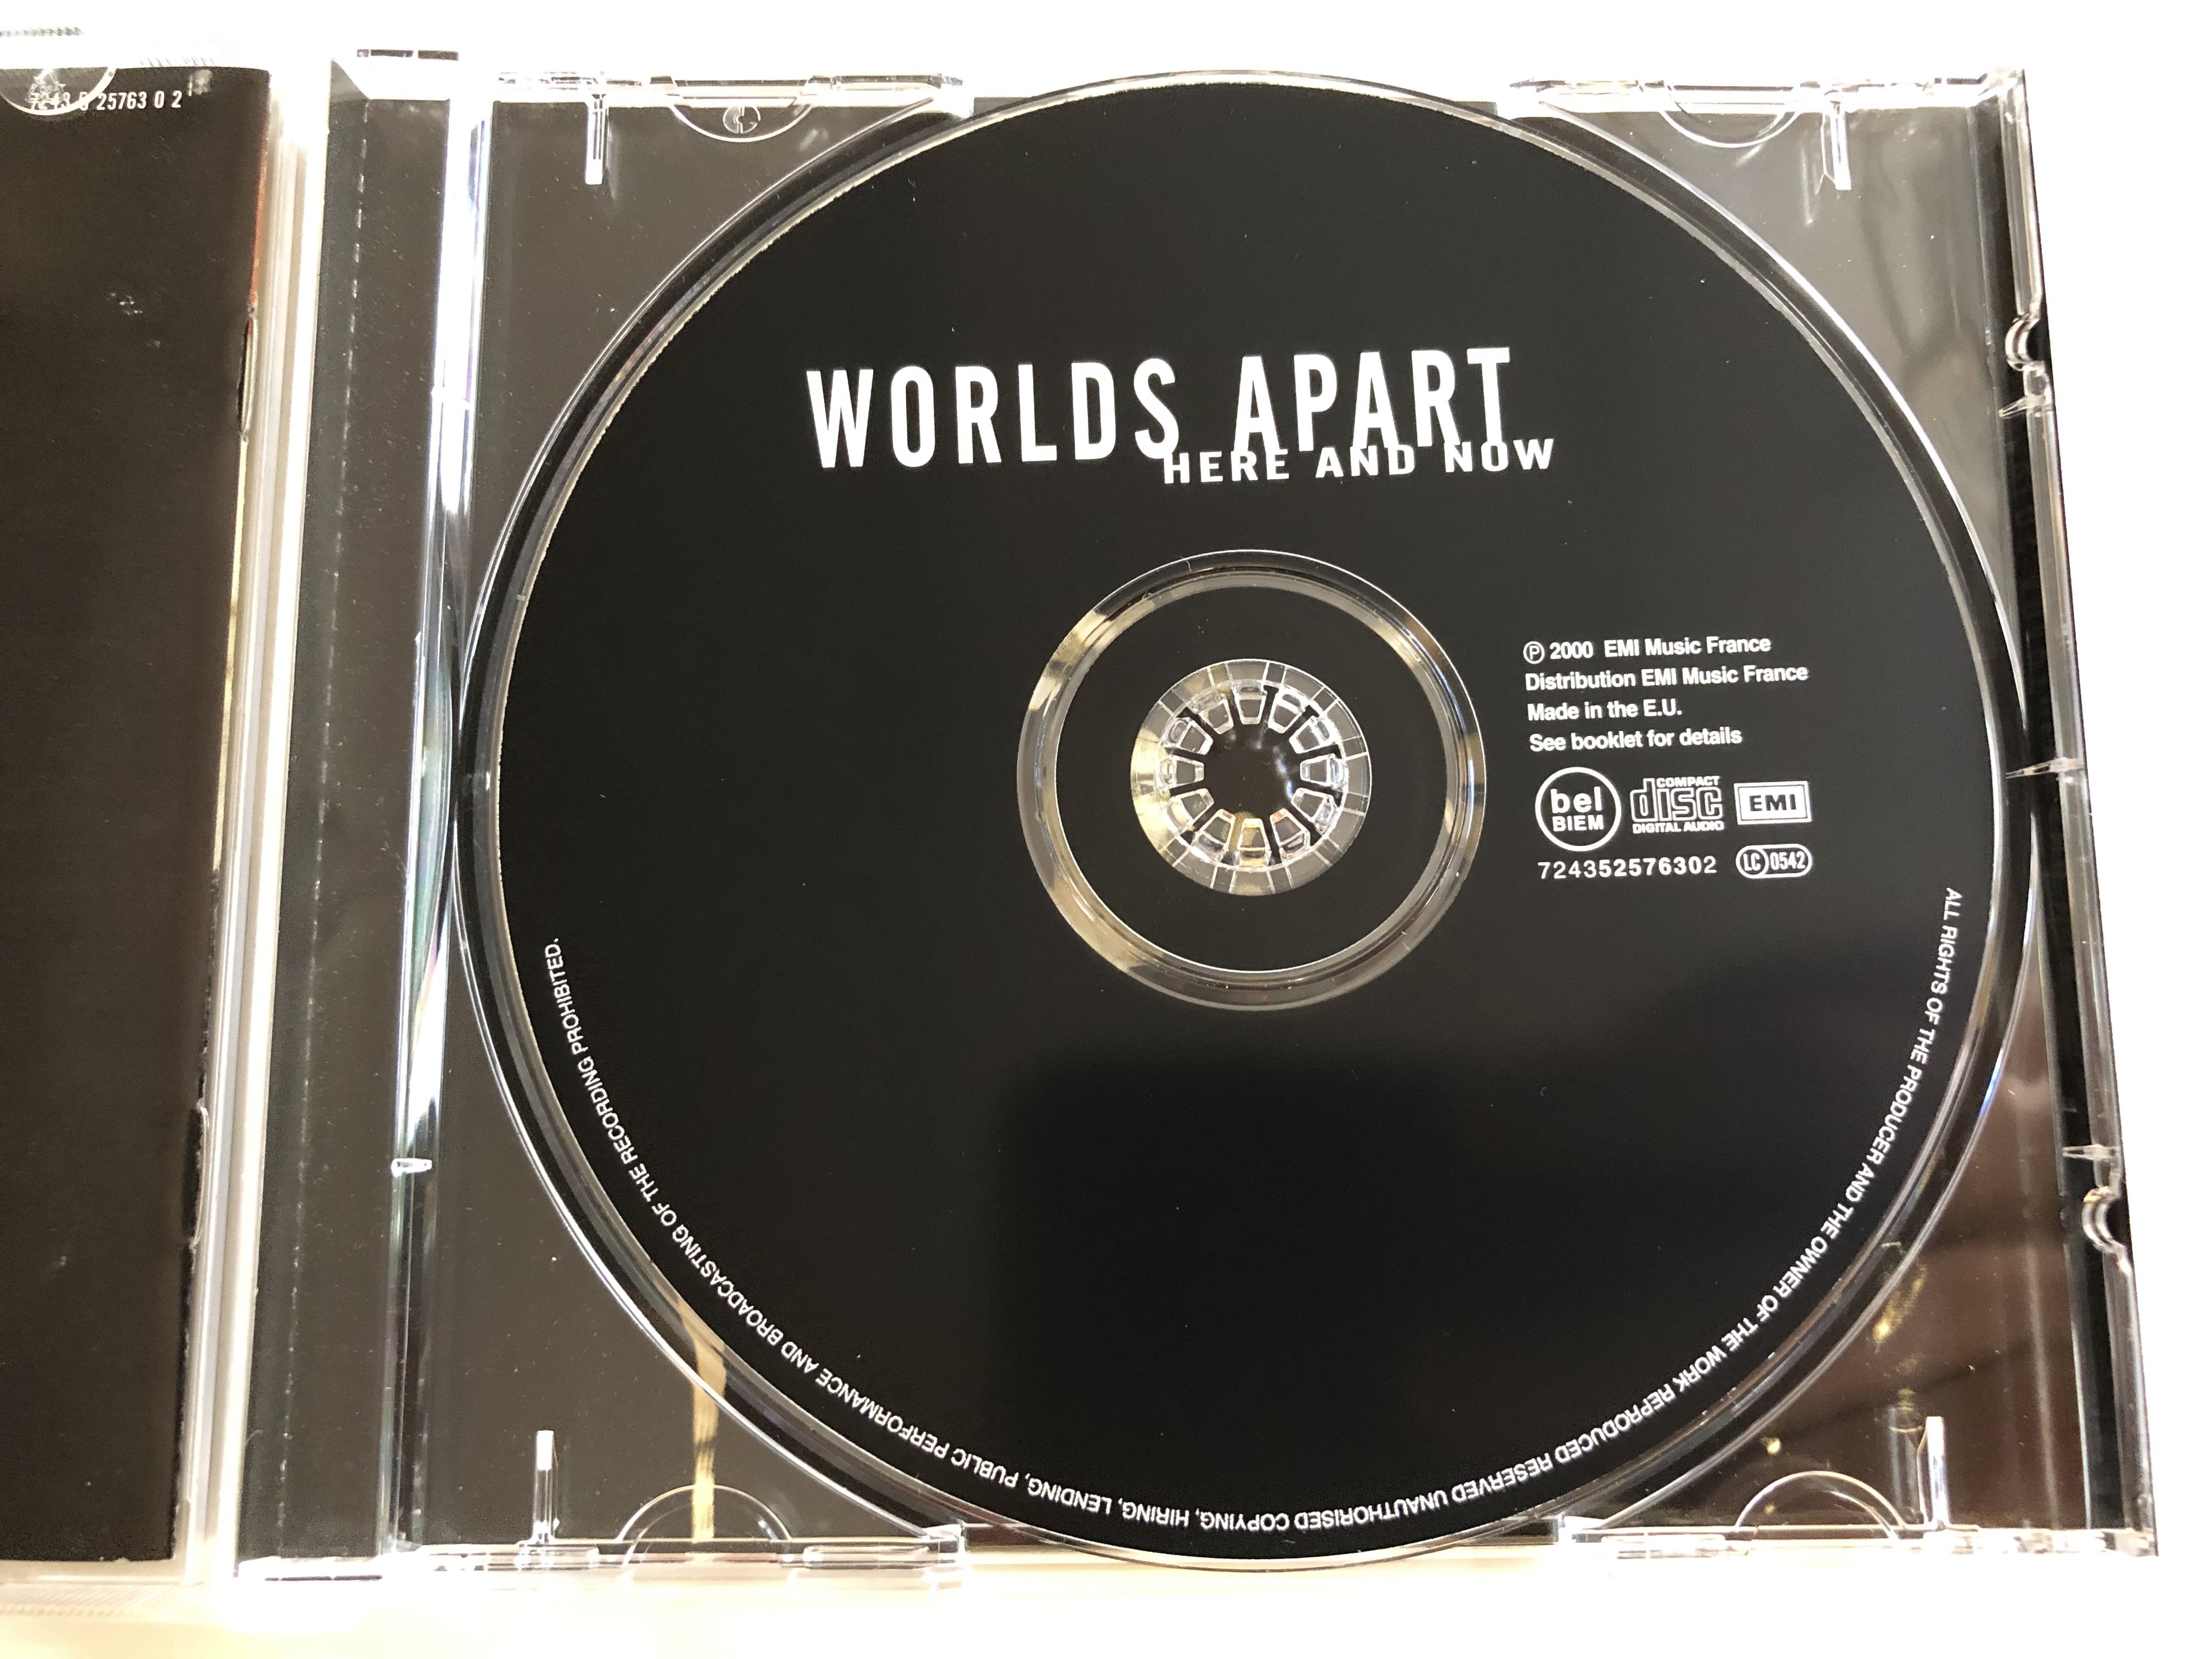 worlds-apart-here-and-now-i-will-language-of-love-i-know-fly-this-time-audio-cd-2000-emi-6-.jpg